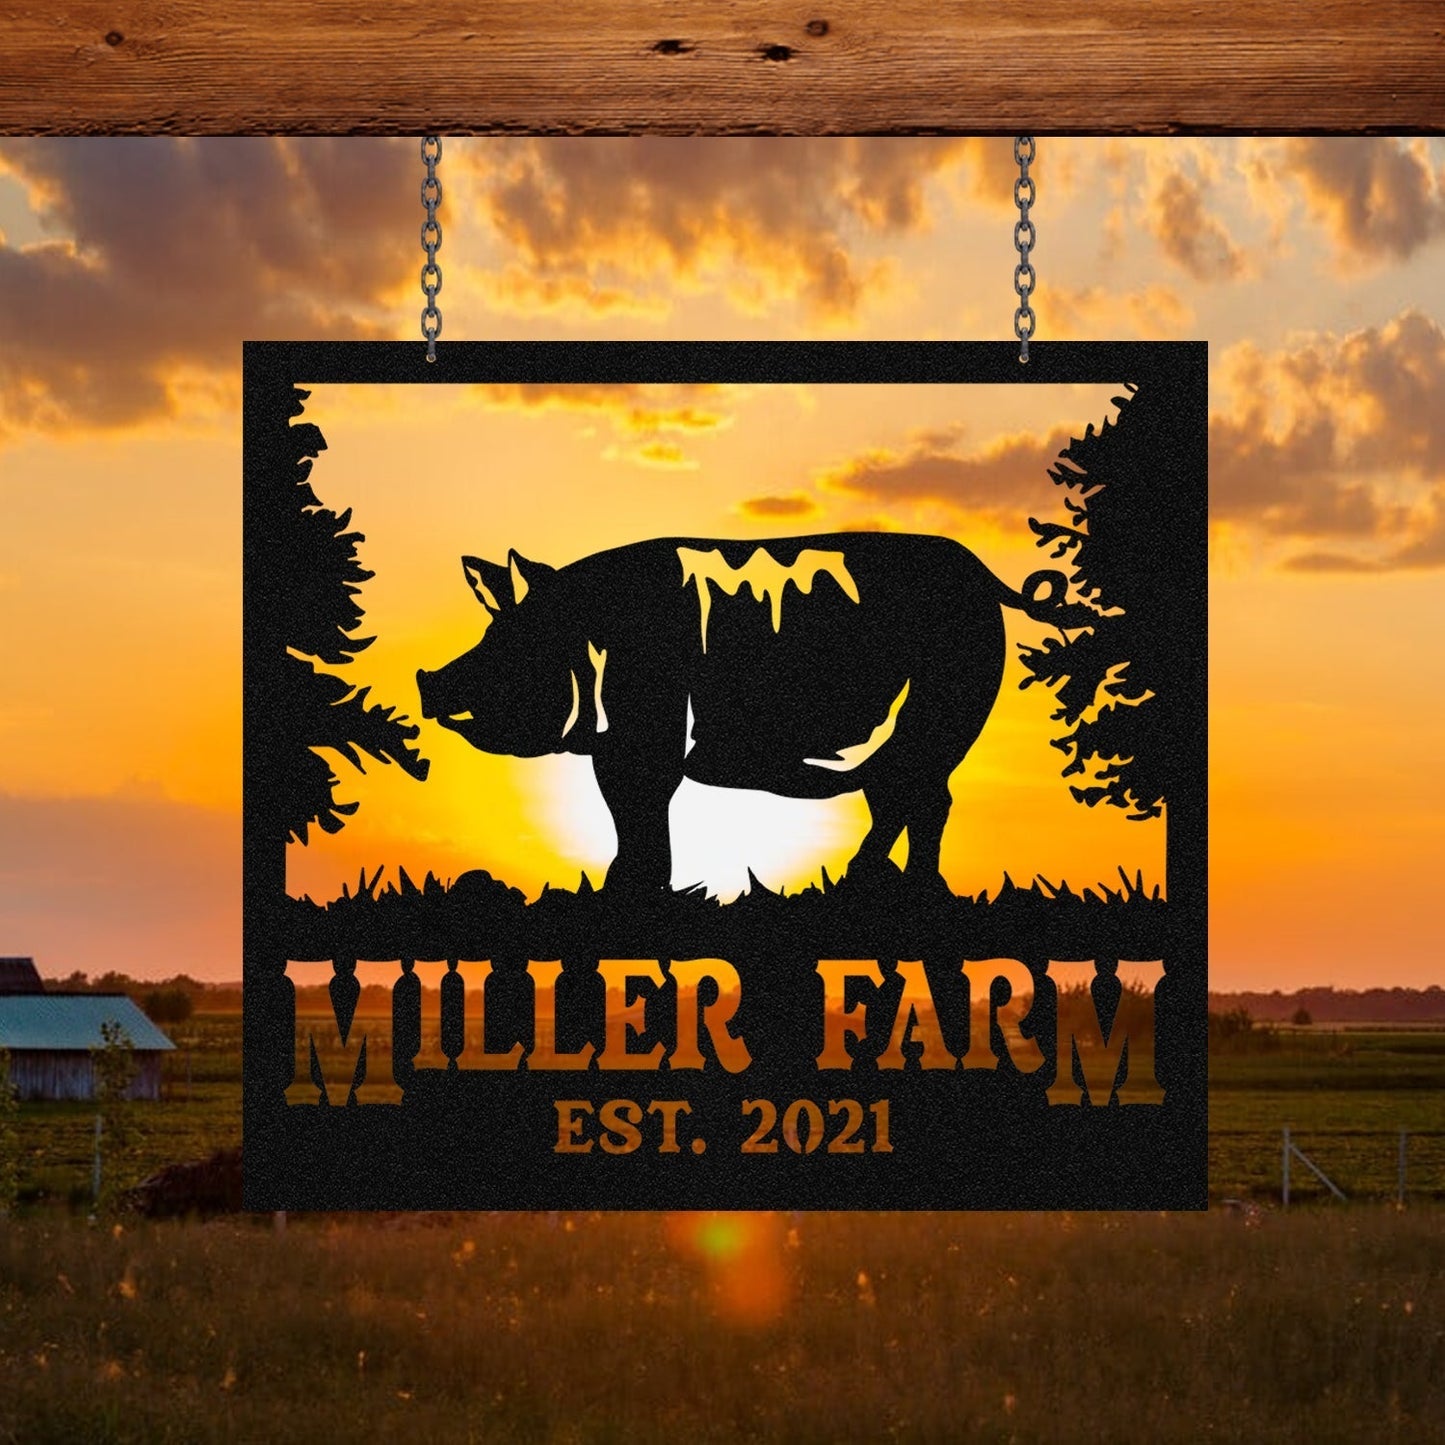 Personalized Metal Farm Sign Pig Monogram Custom Outdoor Farmhouse Ranch Barn Stable Front Gate Wall Decor Art Gift